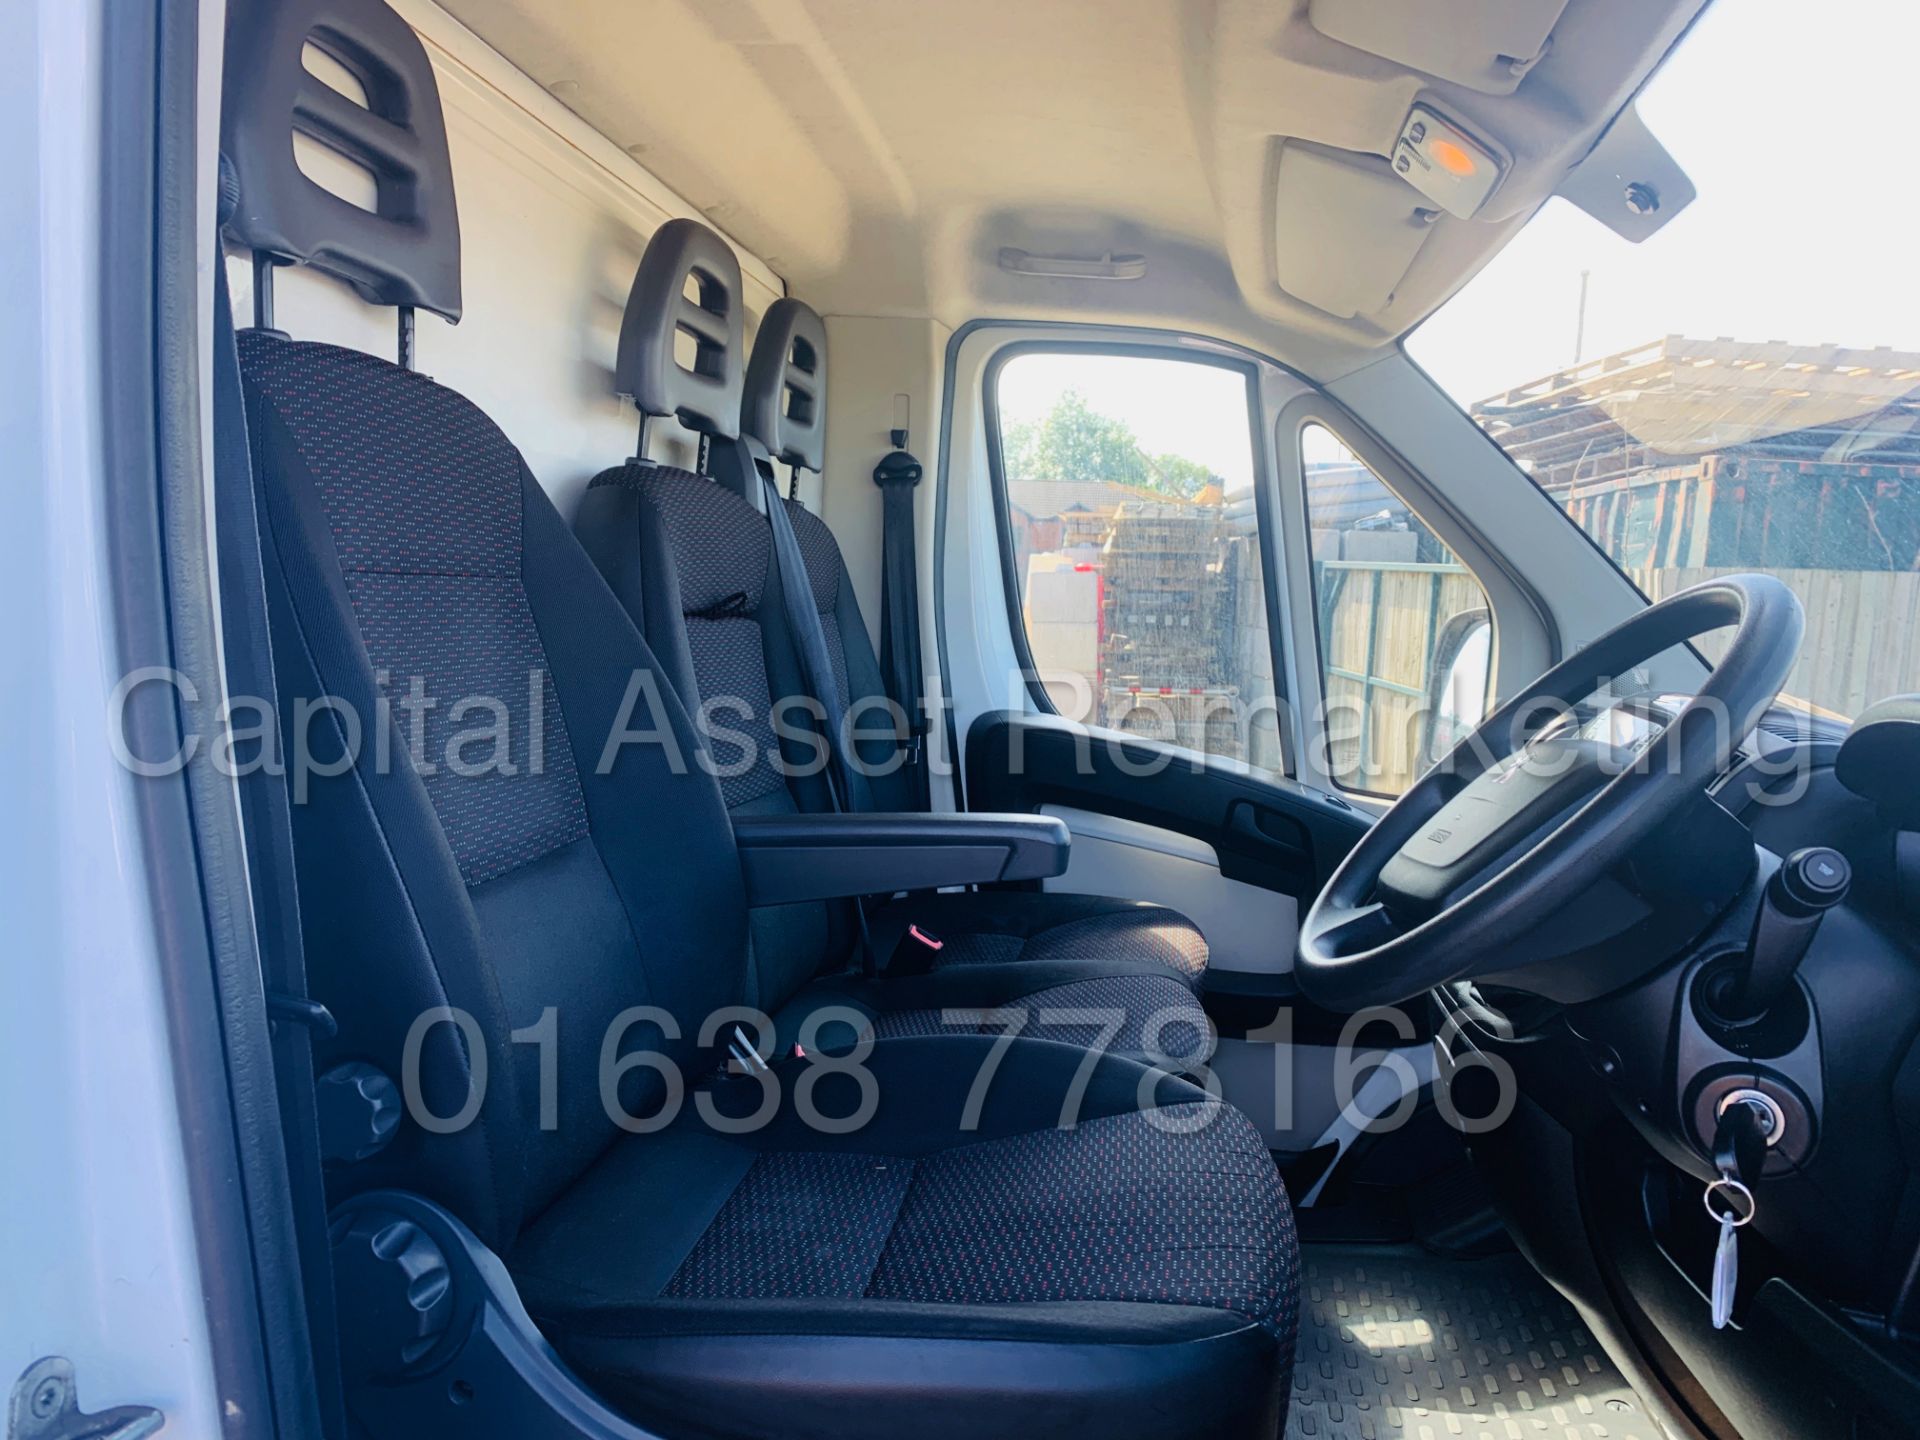 (On Sale) PEUGEOT BOXER *LWB- LO-LOADER / LUTON* (2017 - EURO 6) '2.2 HDI - 6 SPEED' (1 OWNER) - Image 26 of 37